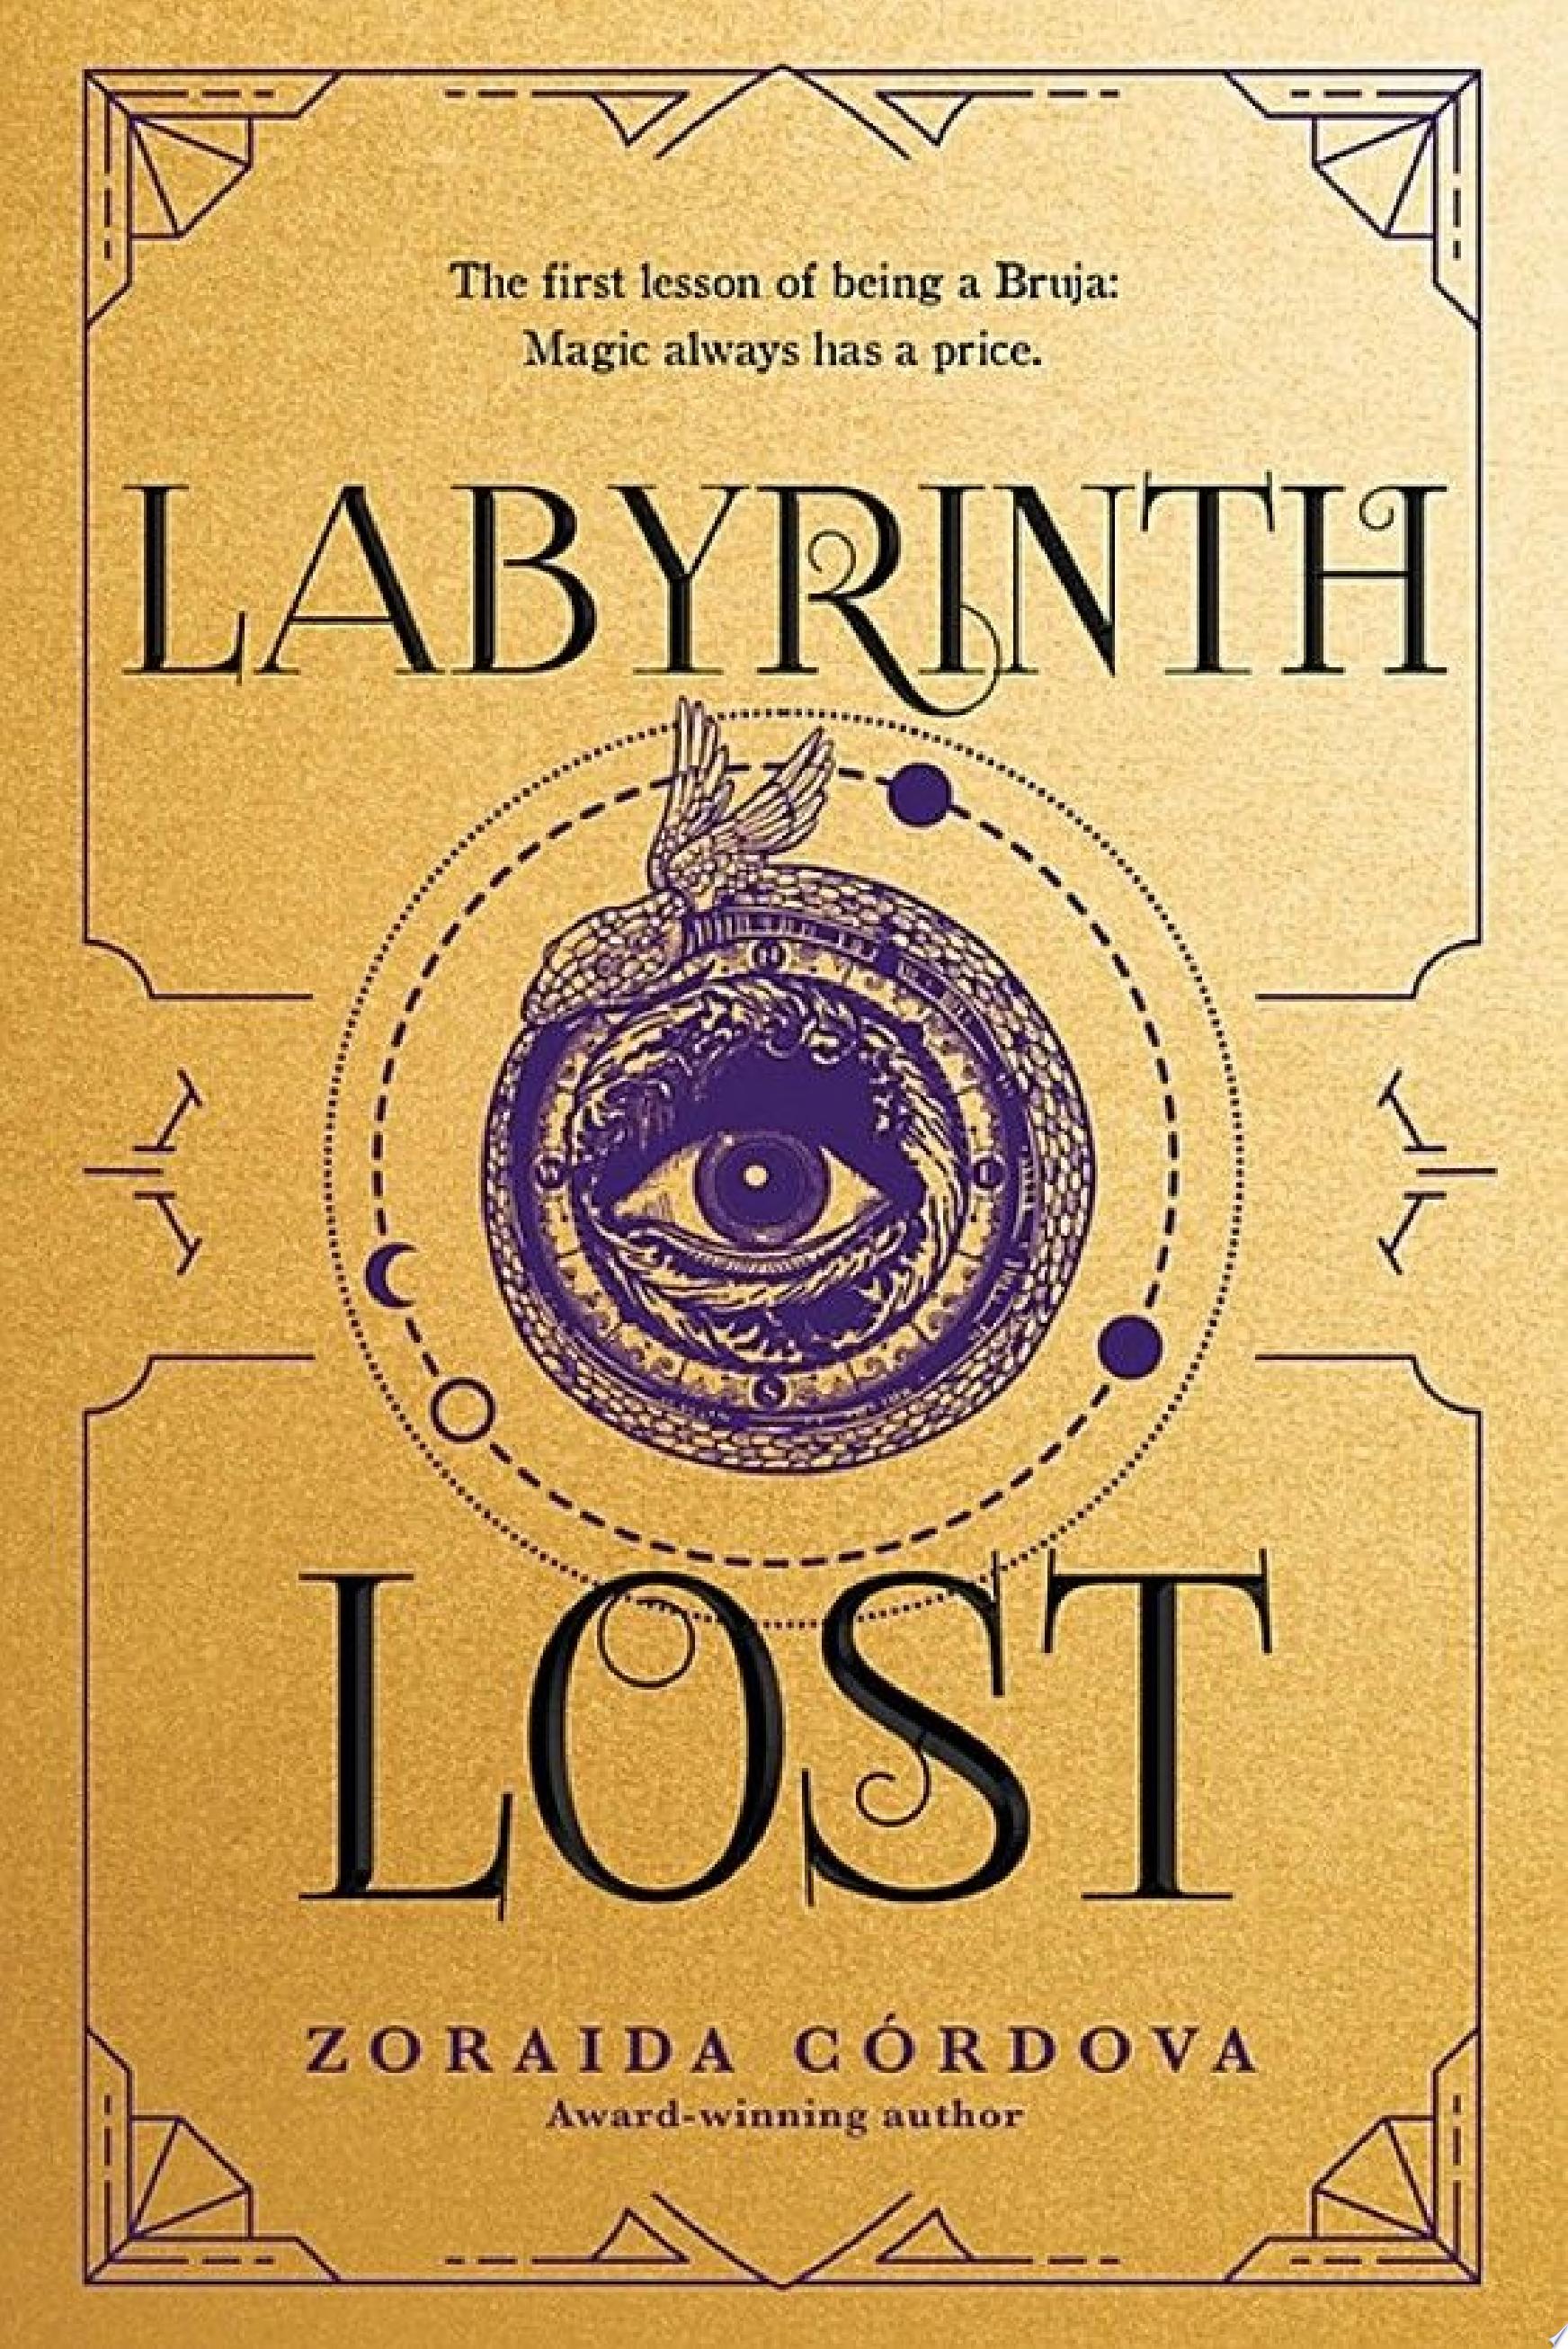 Image for "Labyrinth Lost"